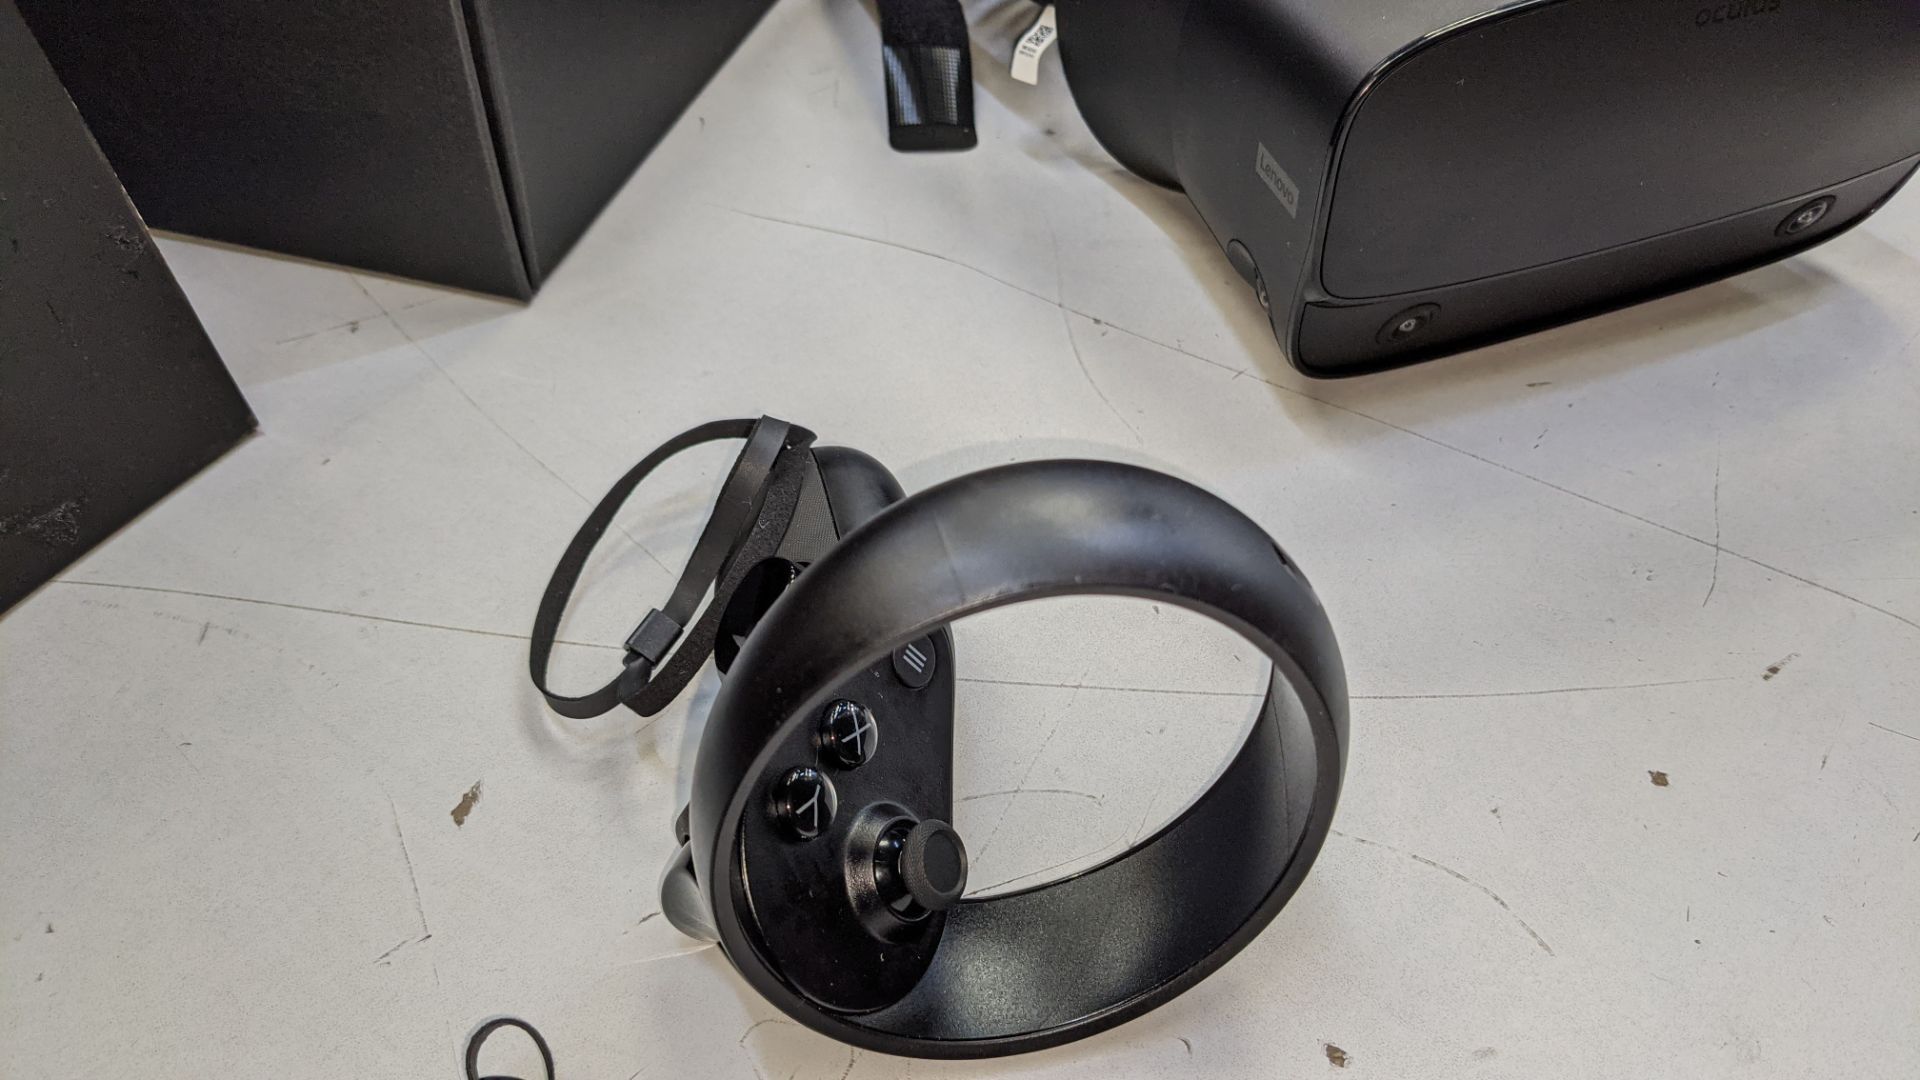 Oculus Rift S virtual reality system comprising headset, controllers, cables, adapters & more - Image 9 of 14